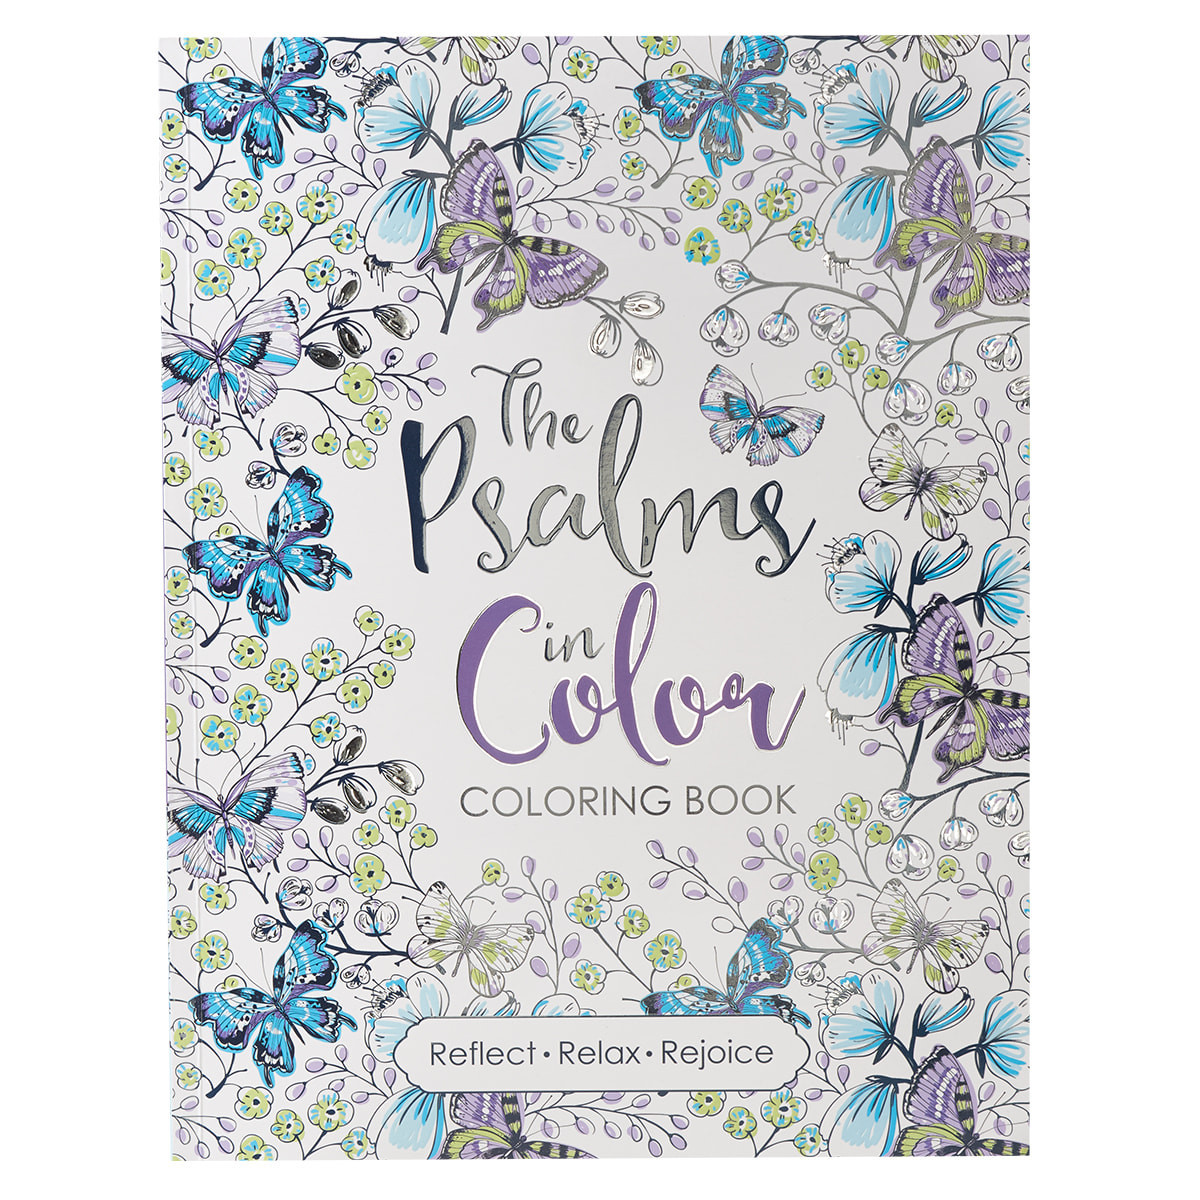 Wholesale Coloring Books For Adults
 Coloring Book The Psalms in Color